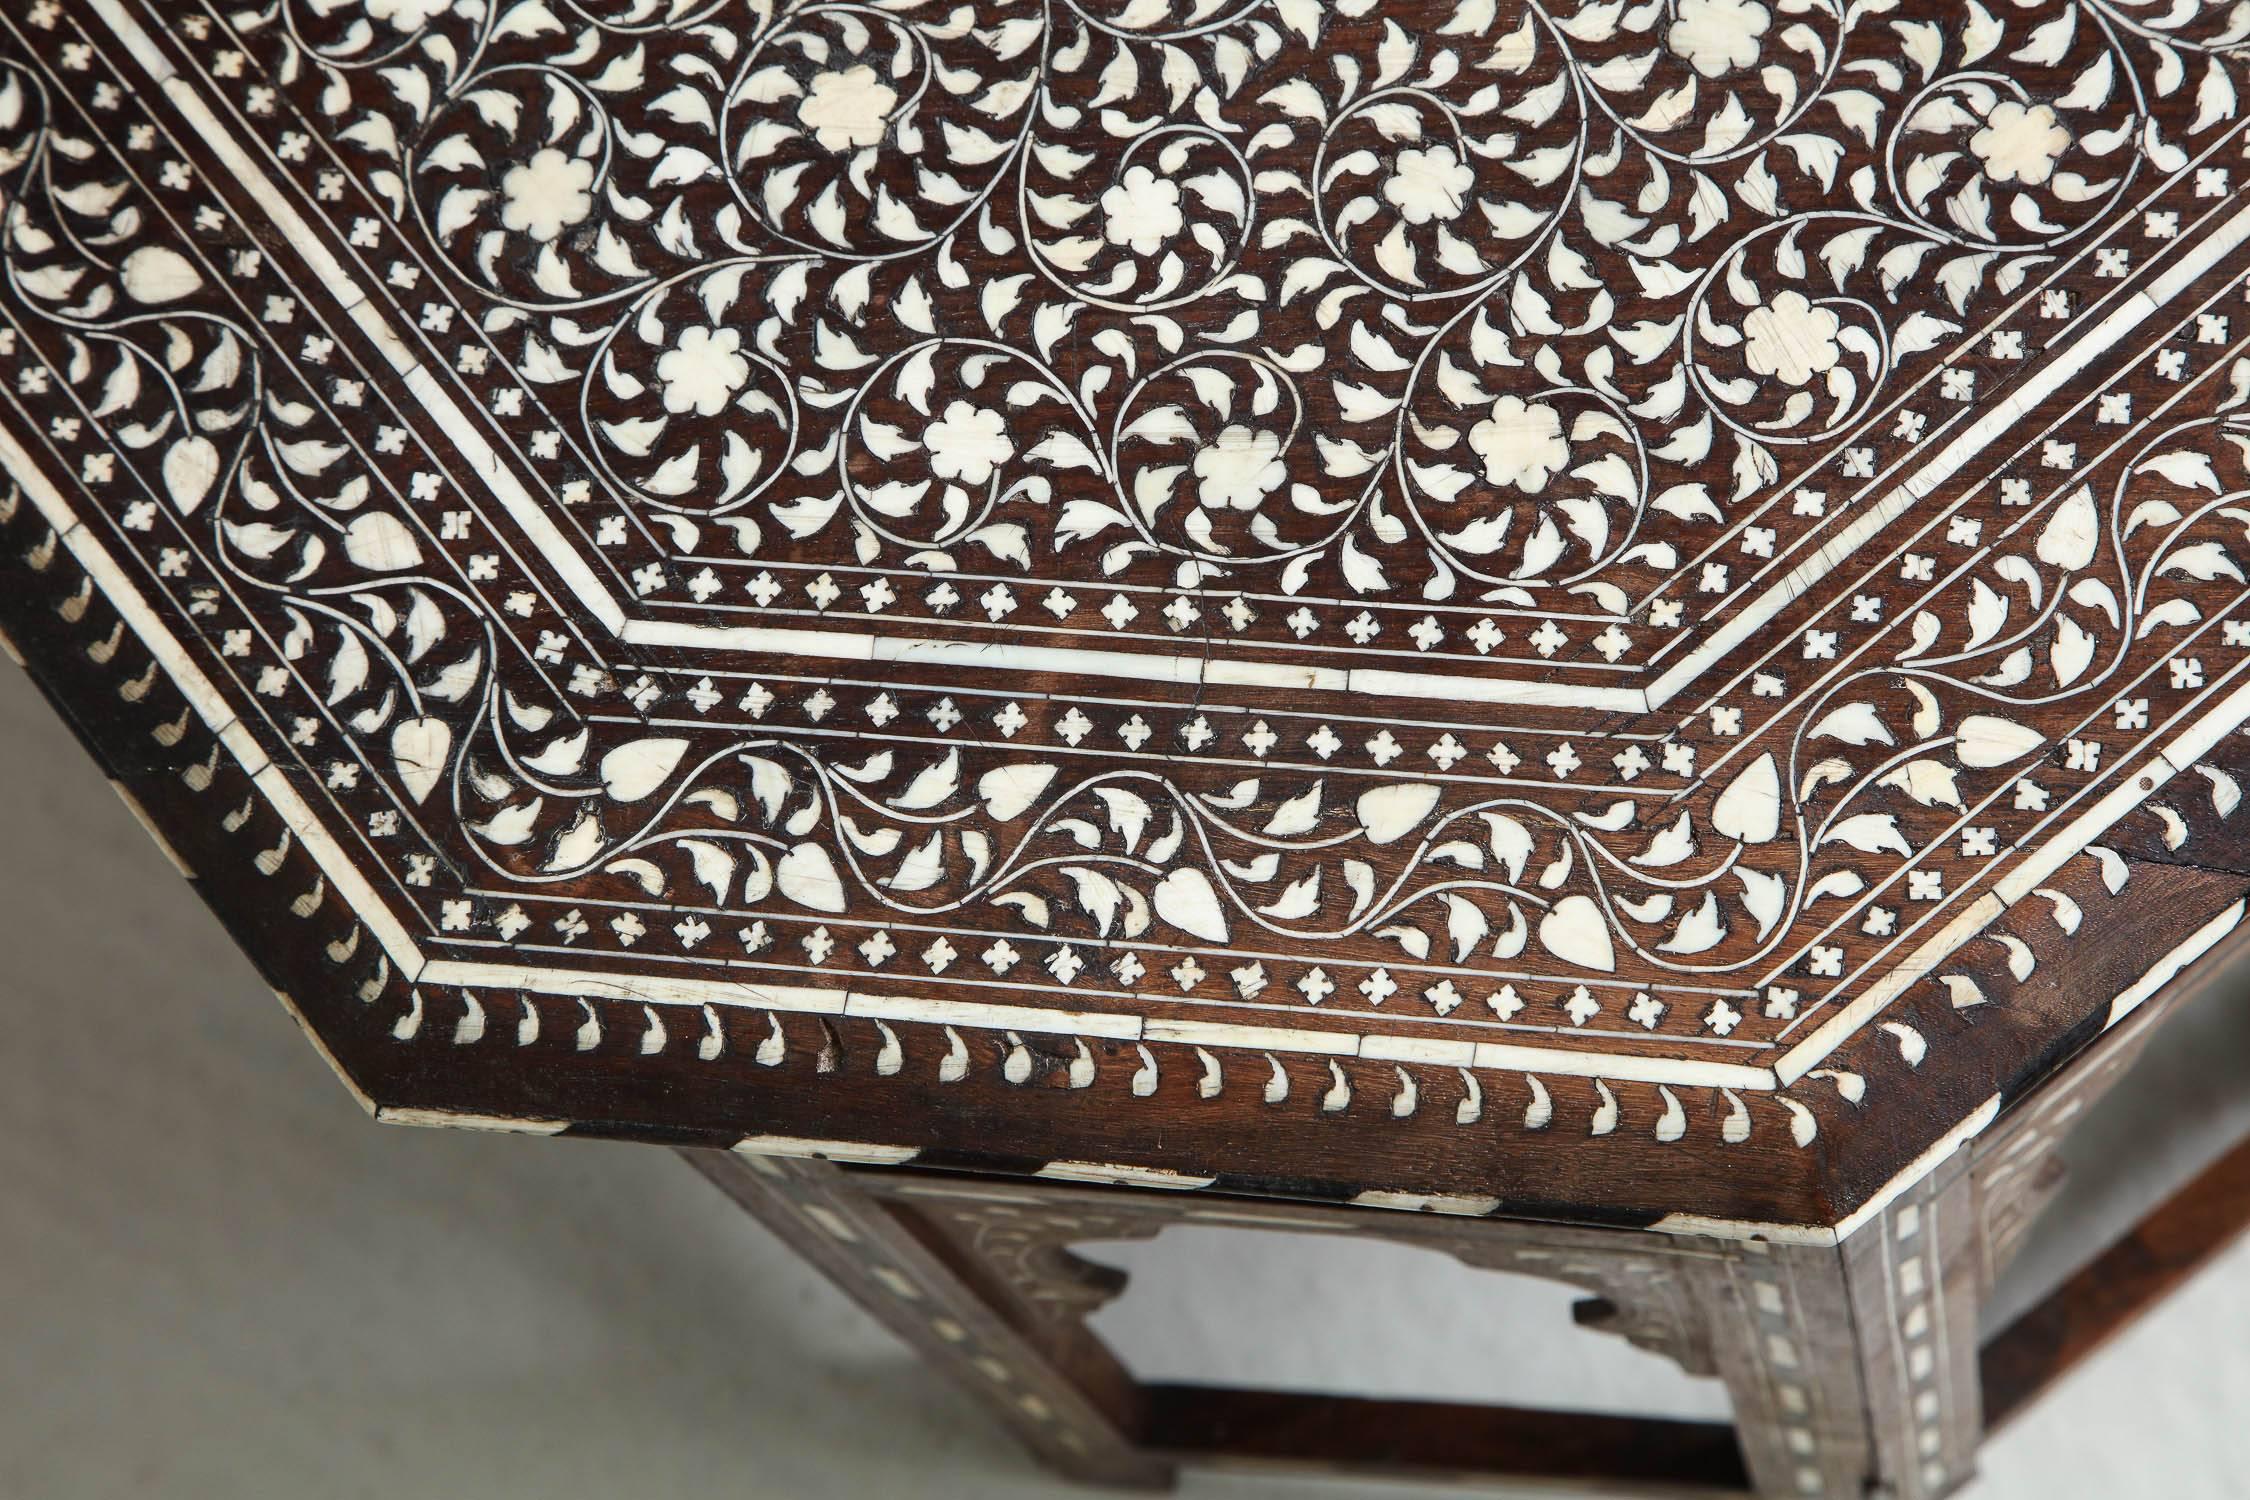 inlaid wood designs of west asia